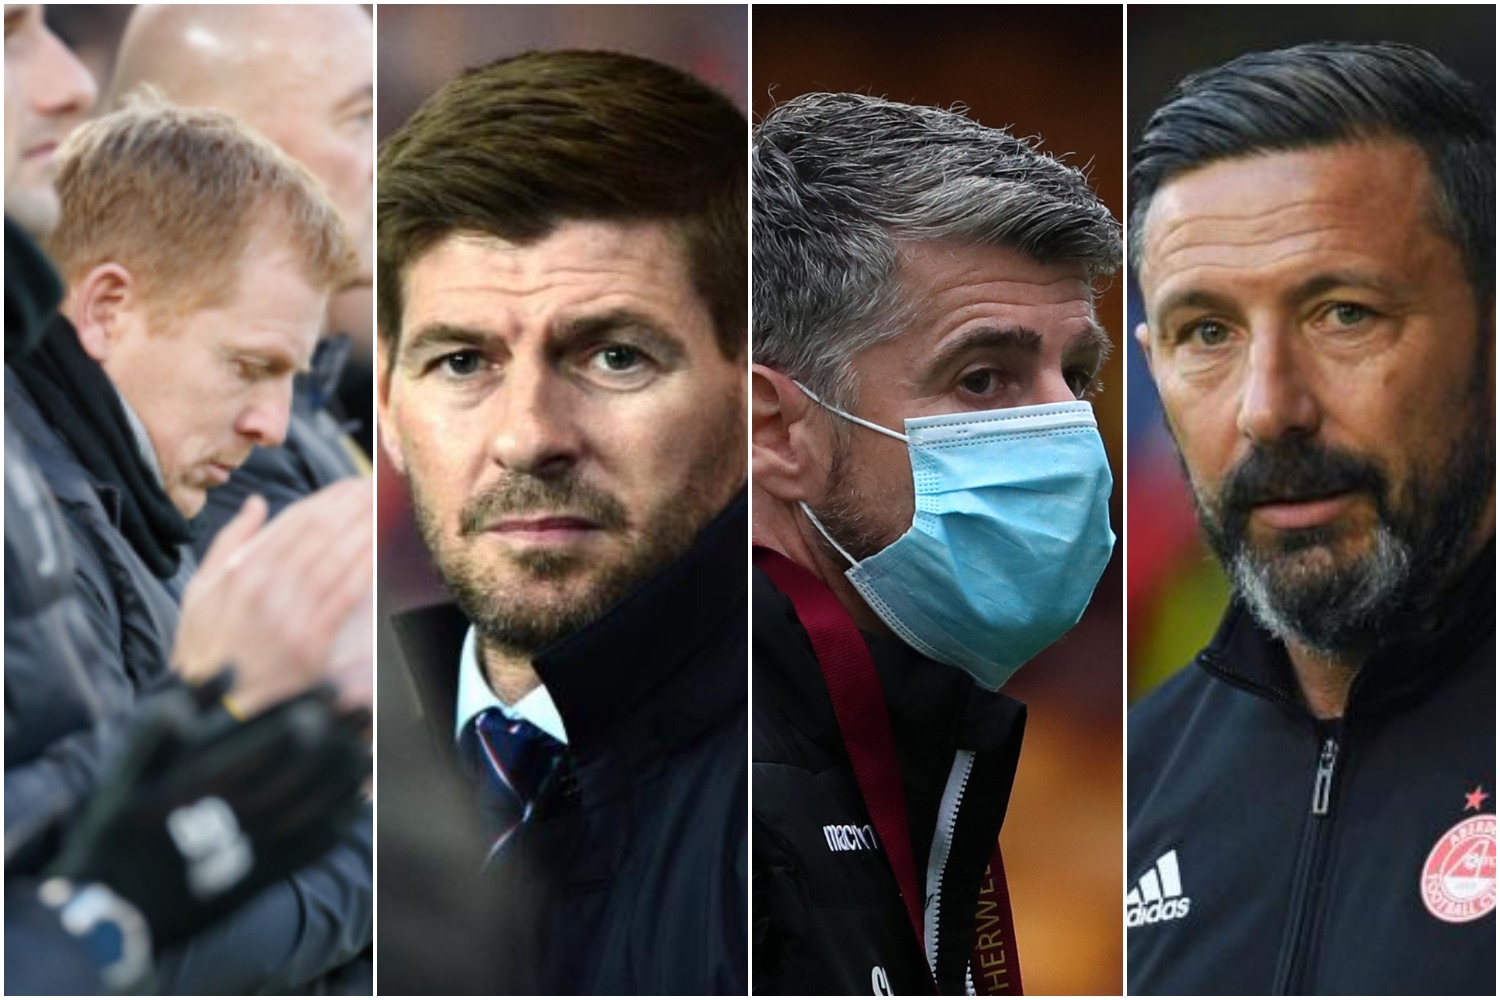 Europa League as it happened: Riga or Tre Fiore vs Celtic | Progres or Willem II vs Rangers or Imps | Aberdeen or Viking away to Sporting Lisbon | Motherwell away to Lac or Be'er Sheva